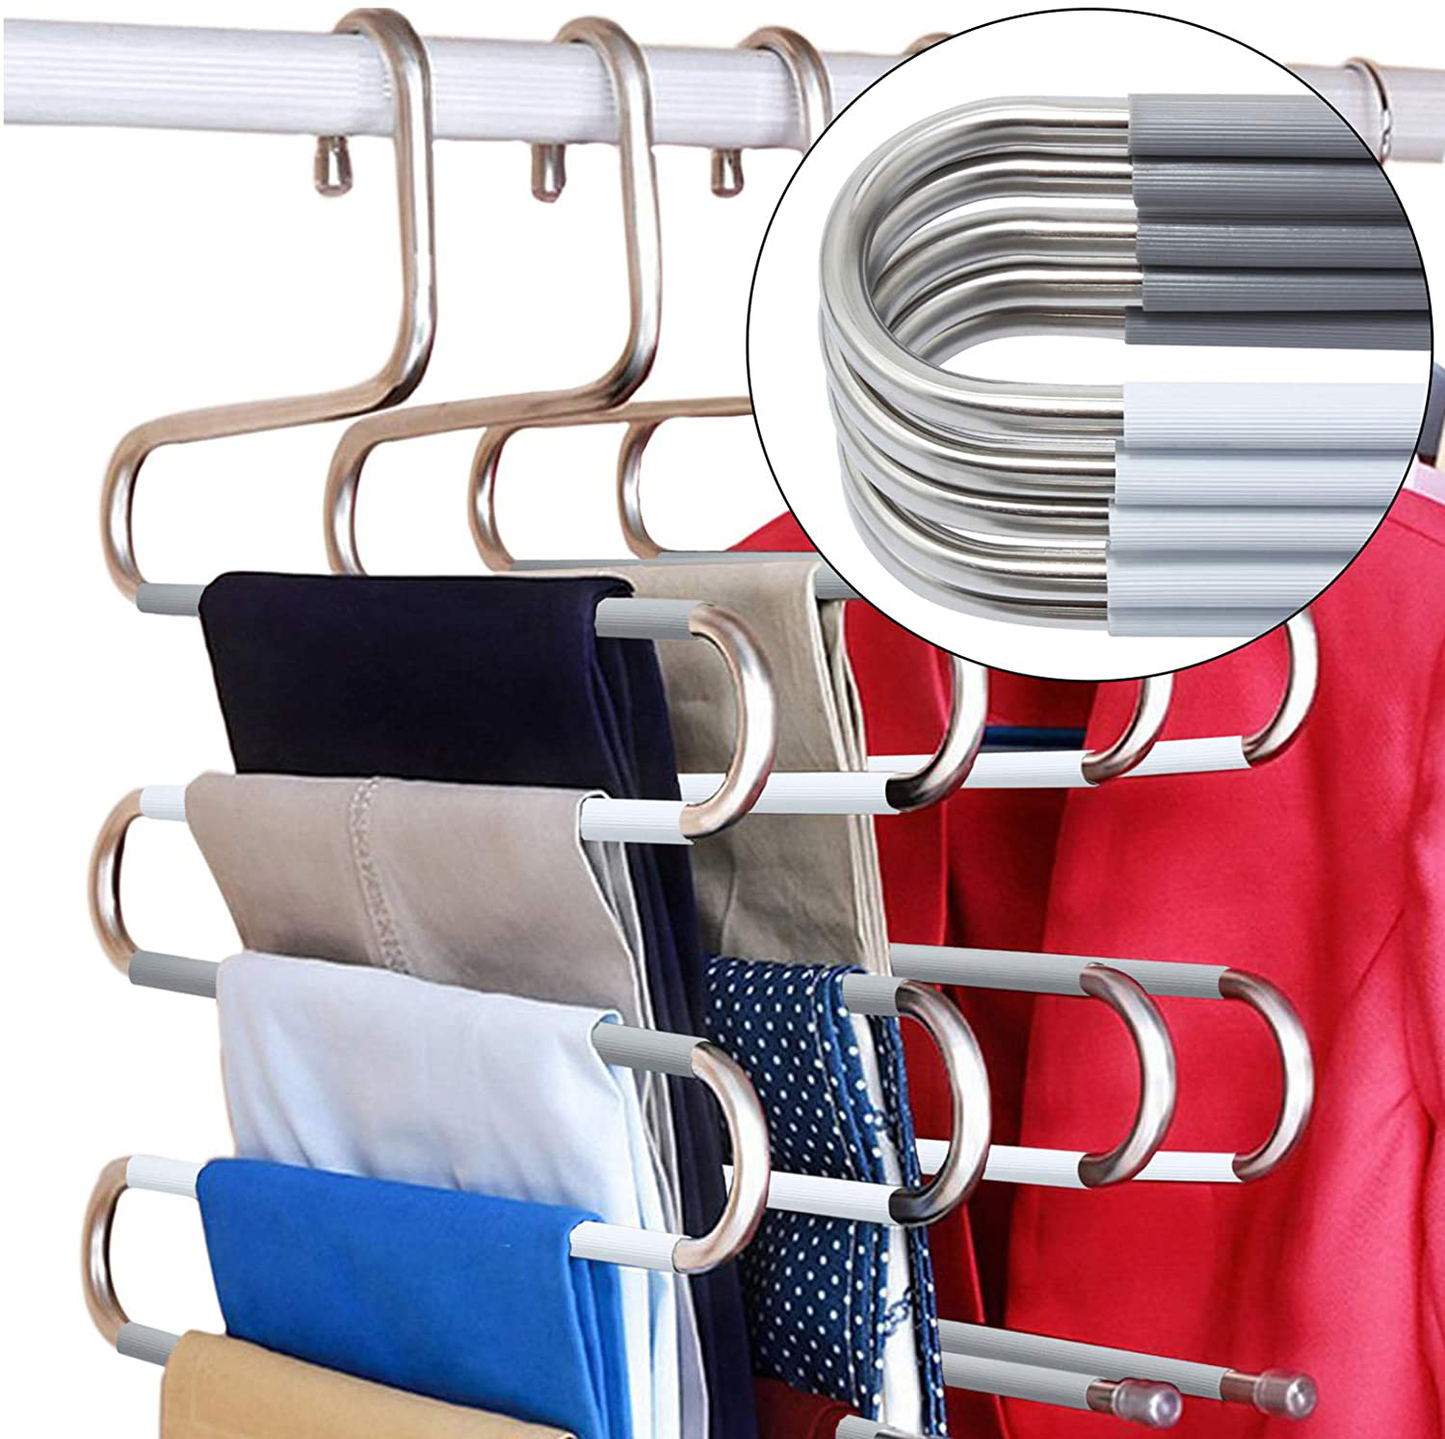 DOIOWN S-Type Stainless Steel Clothes Pants Hangers Closet Storage Organizer for Pants Jeans Scarf Hanging (14.17 x 14.96ins, Set of 3) (5-Pieces-White&Grey(Upgrade Style))